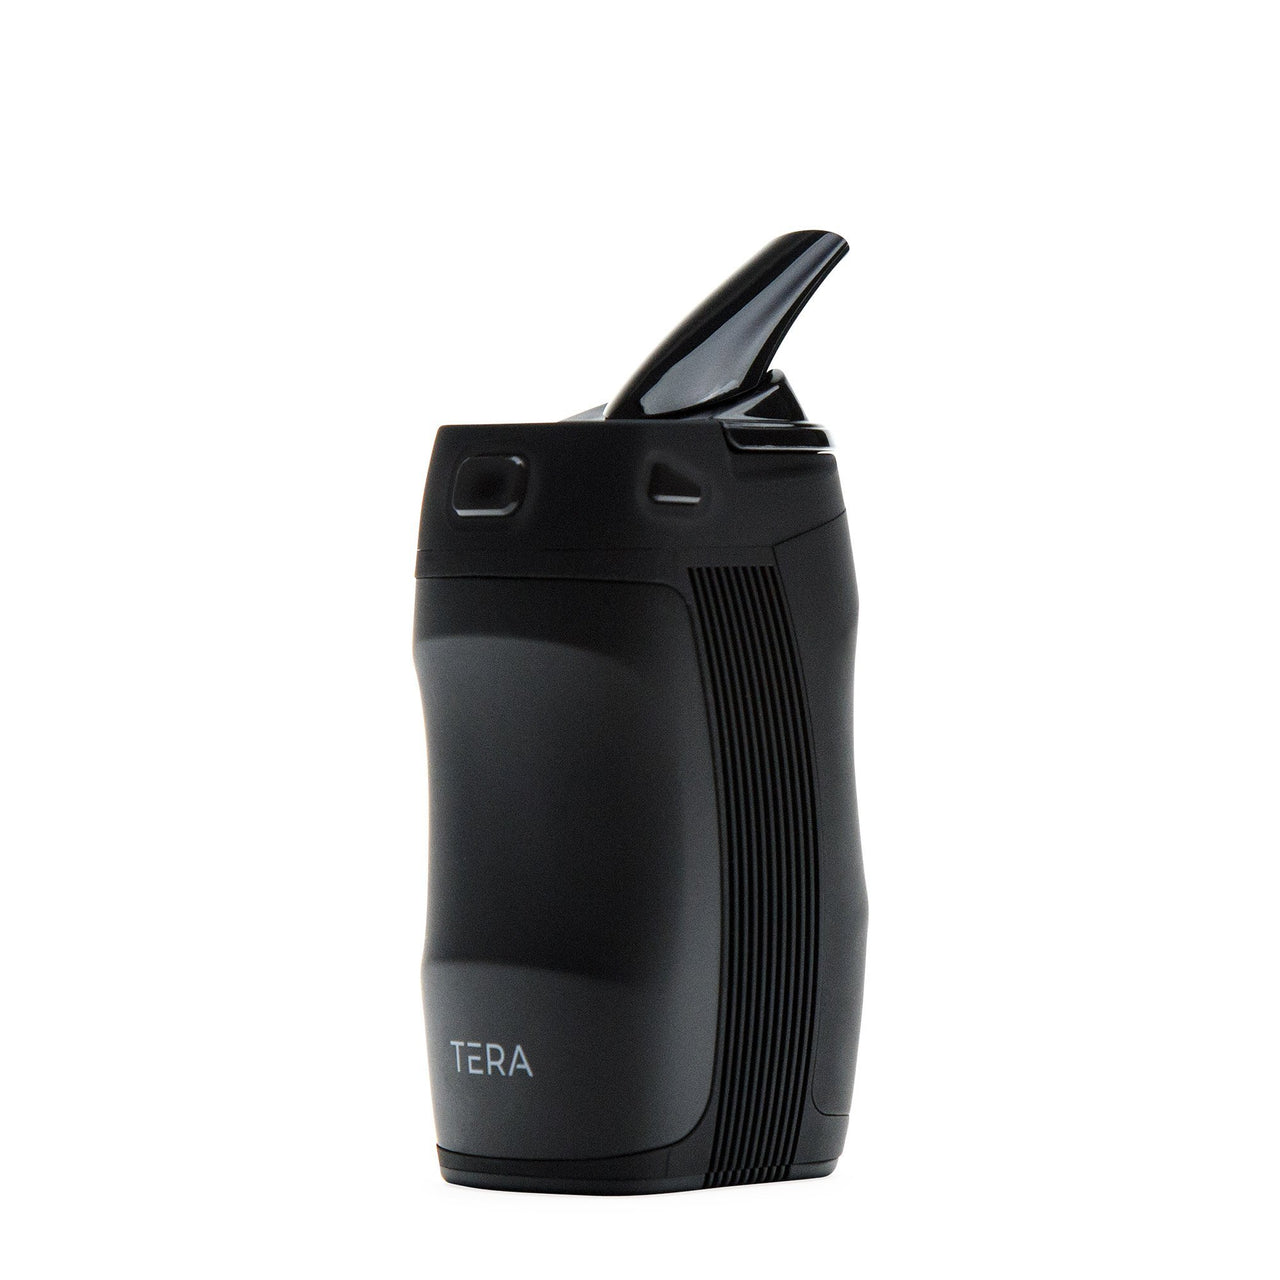 Boundless Tera Vaporizer - 420 Science - The most trusted online smoke shop.